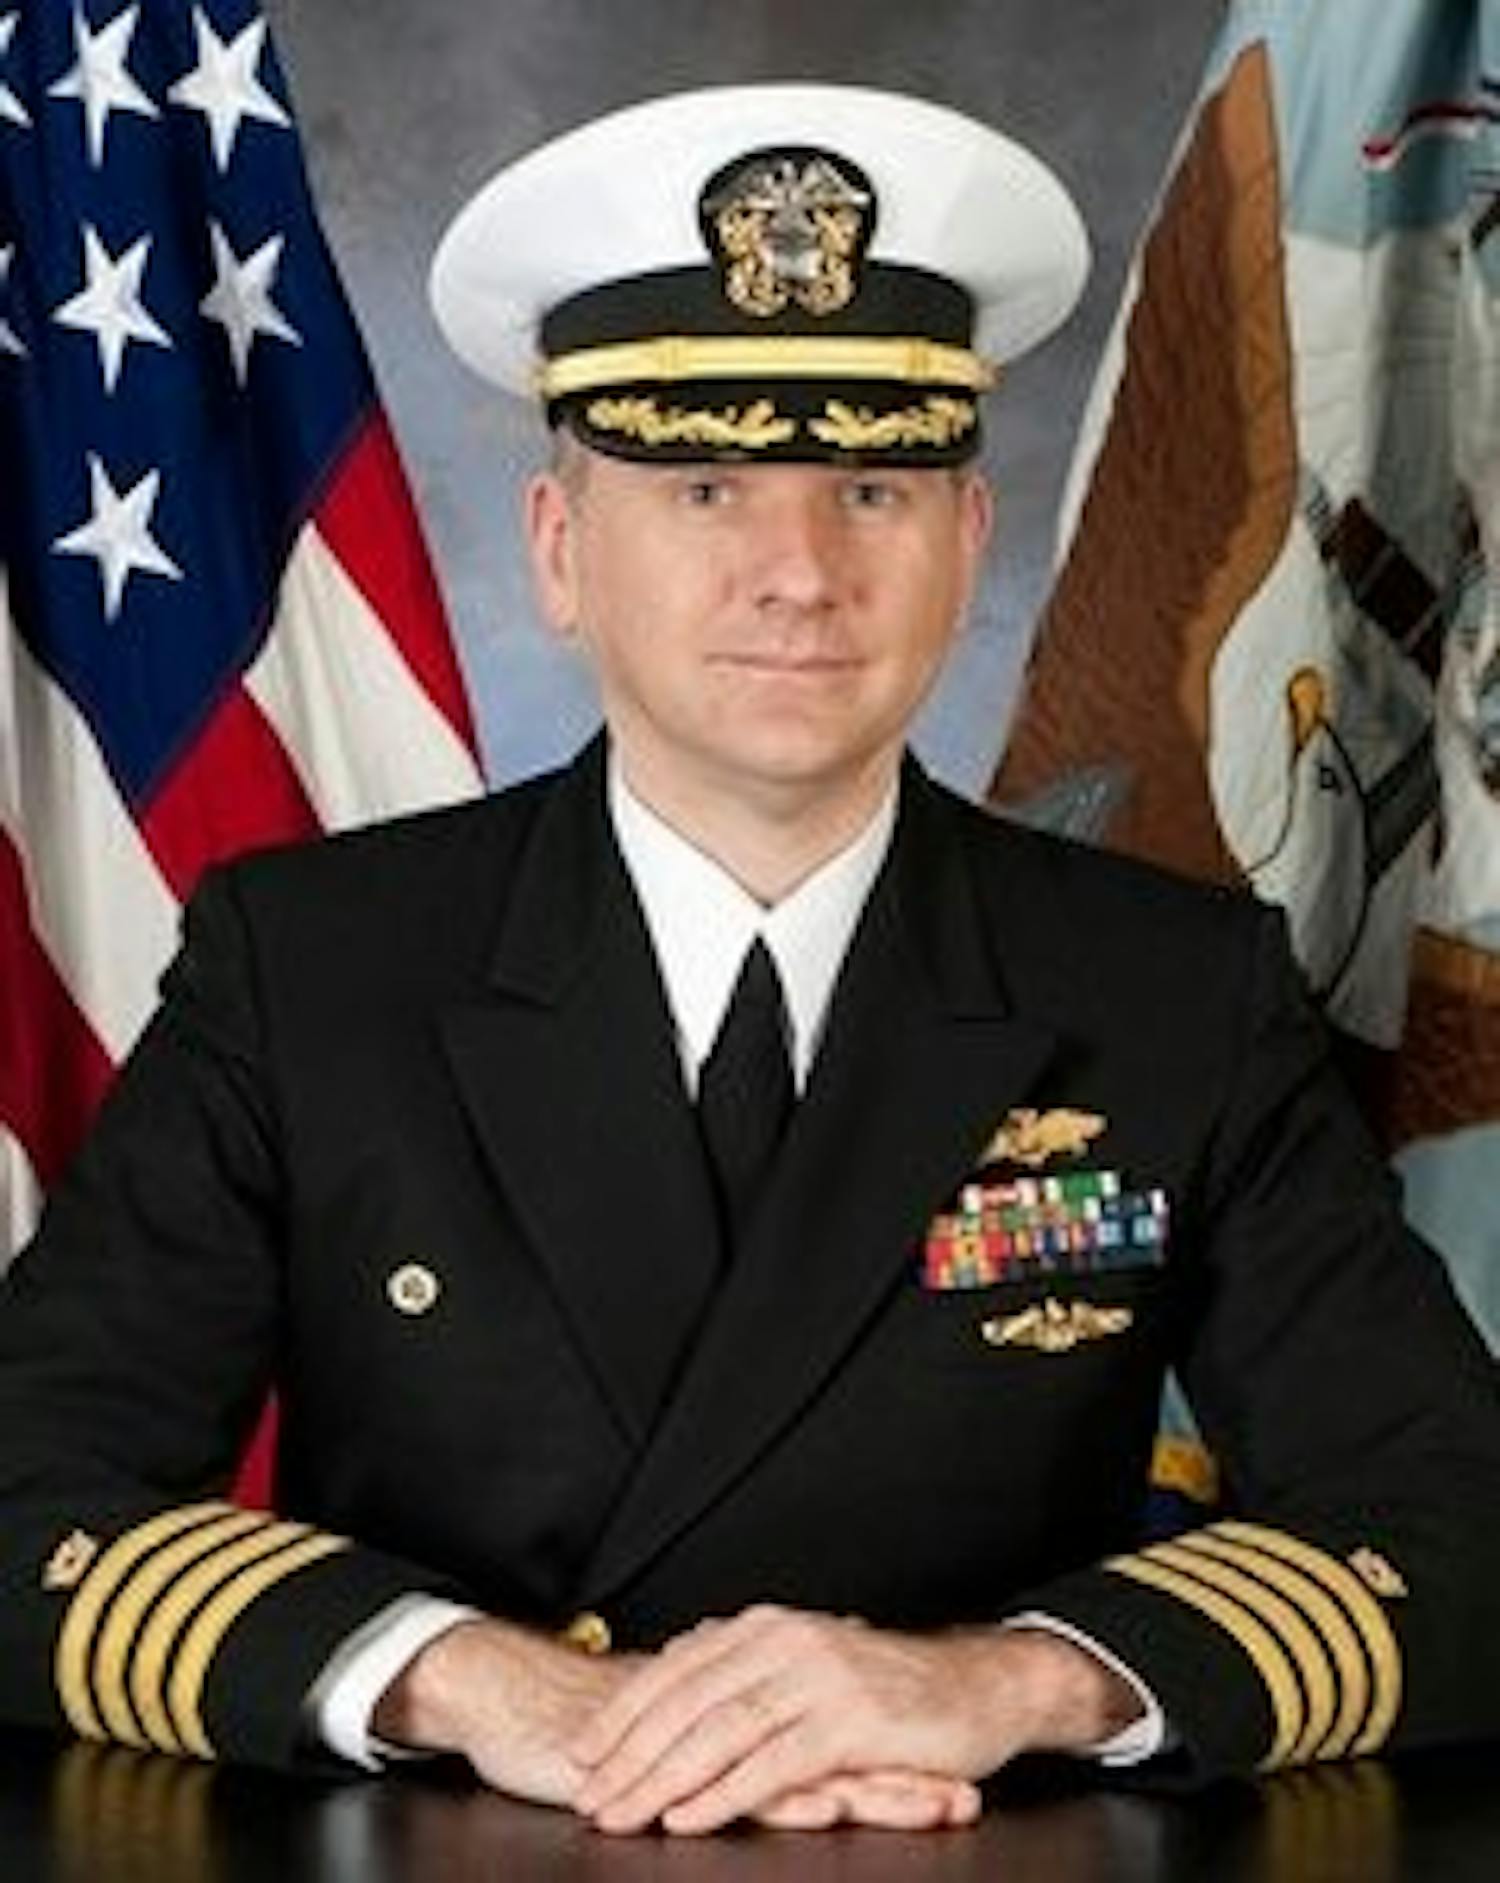 Chris LaPlatney graduated from Auburn in 1988 with a degree in civil engineering. After graduation, he was commissioned as an ensign in the United States Navy. (Courtesy of Chris LaPlatney)